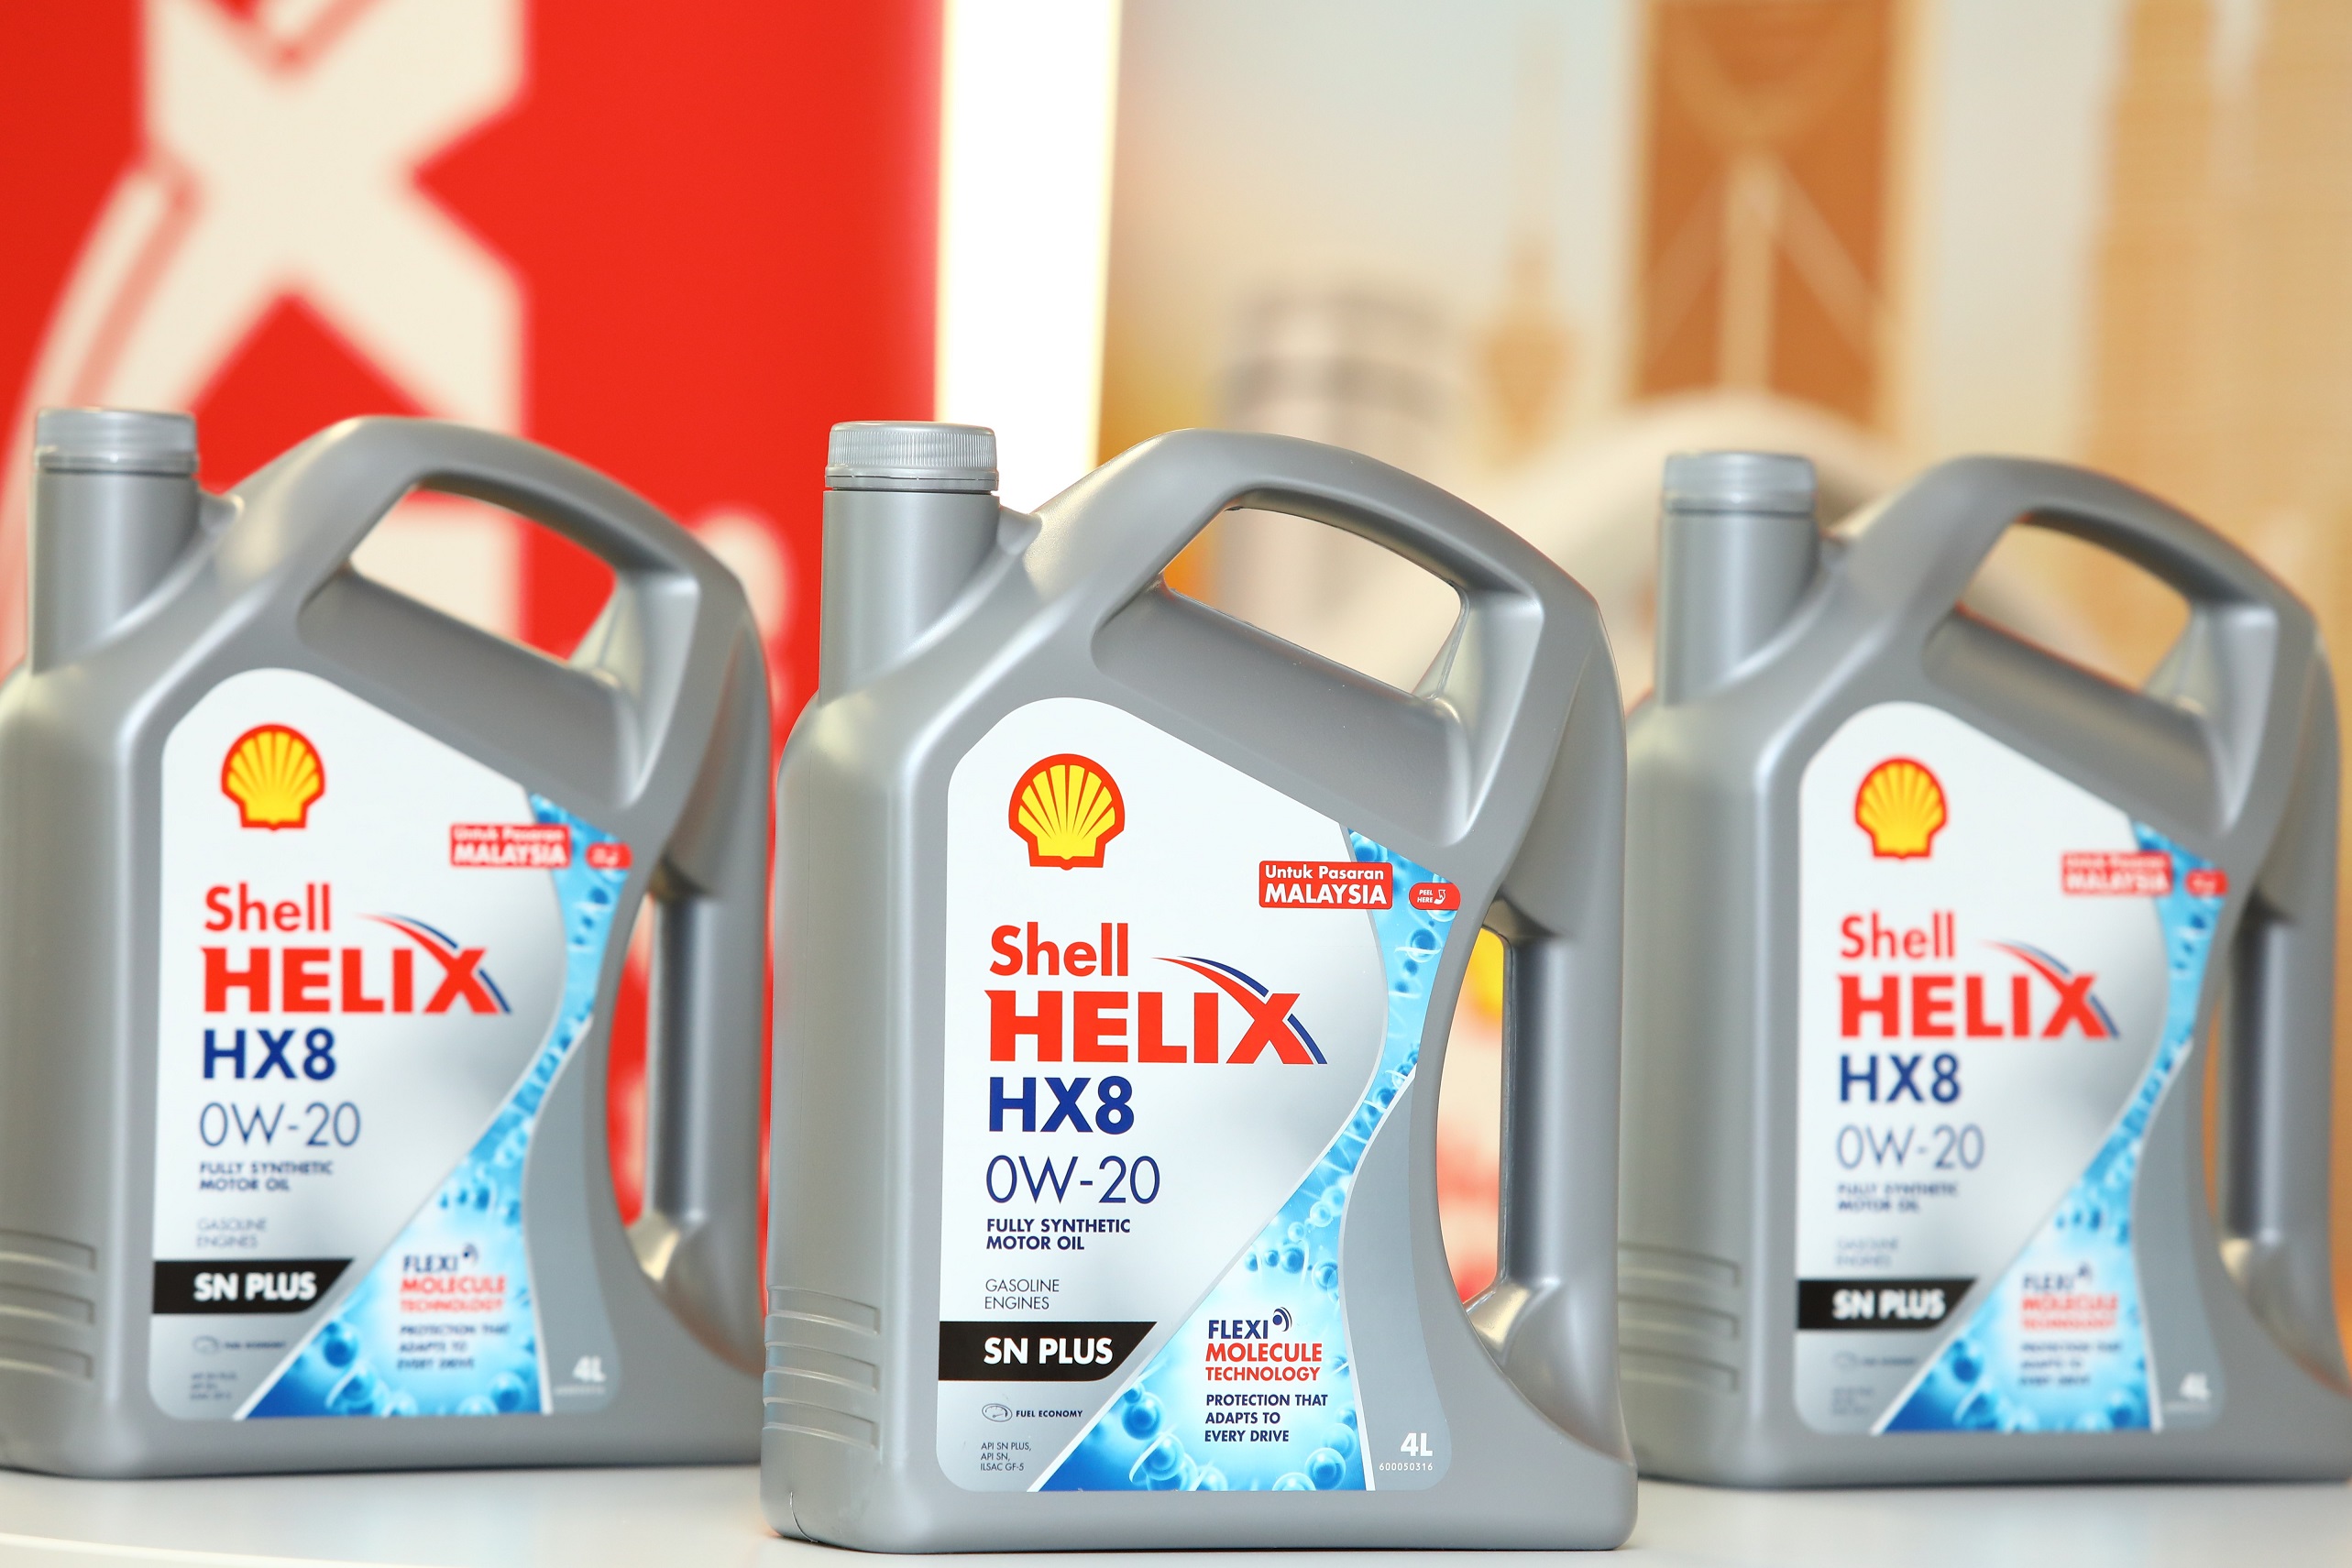 The New Shell Helix Hx8 0w 20 Is A Low Viscosity Fully Synthetic Oil Suitable For Modern Cars 2